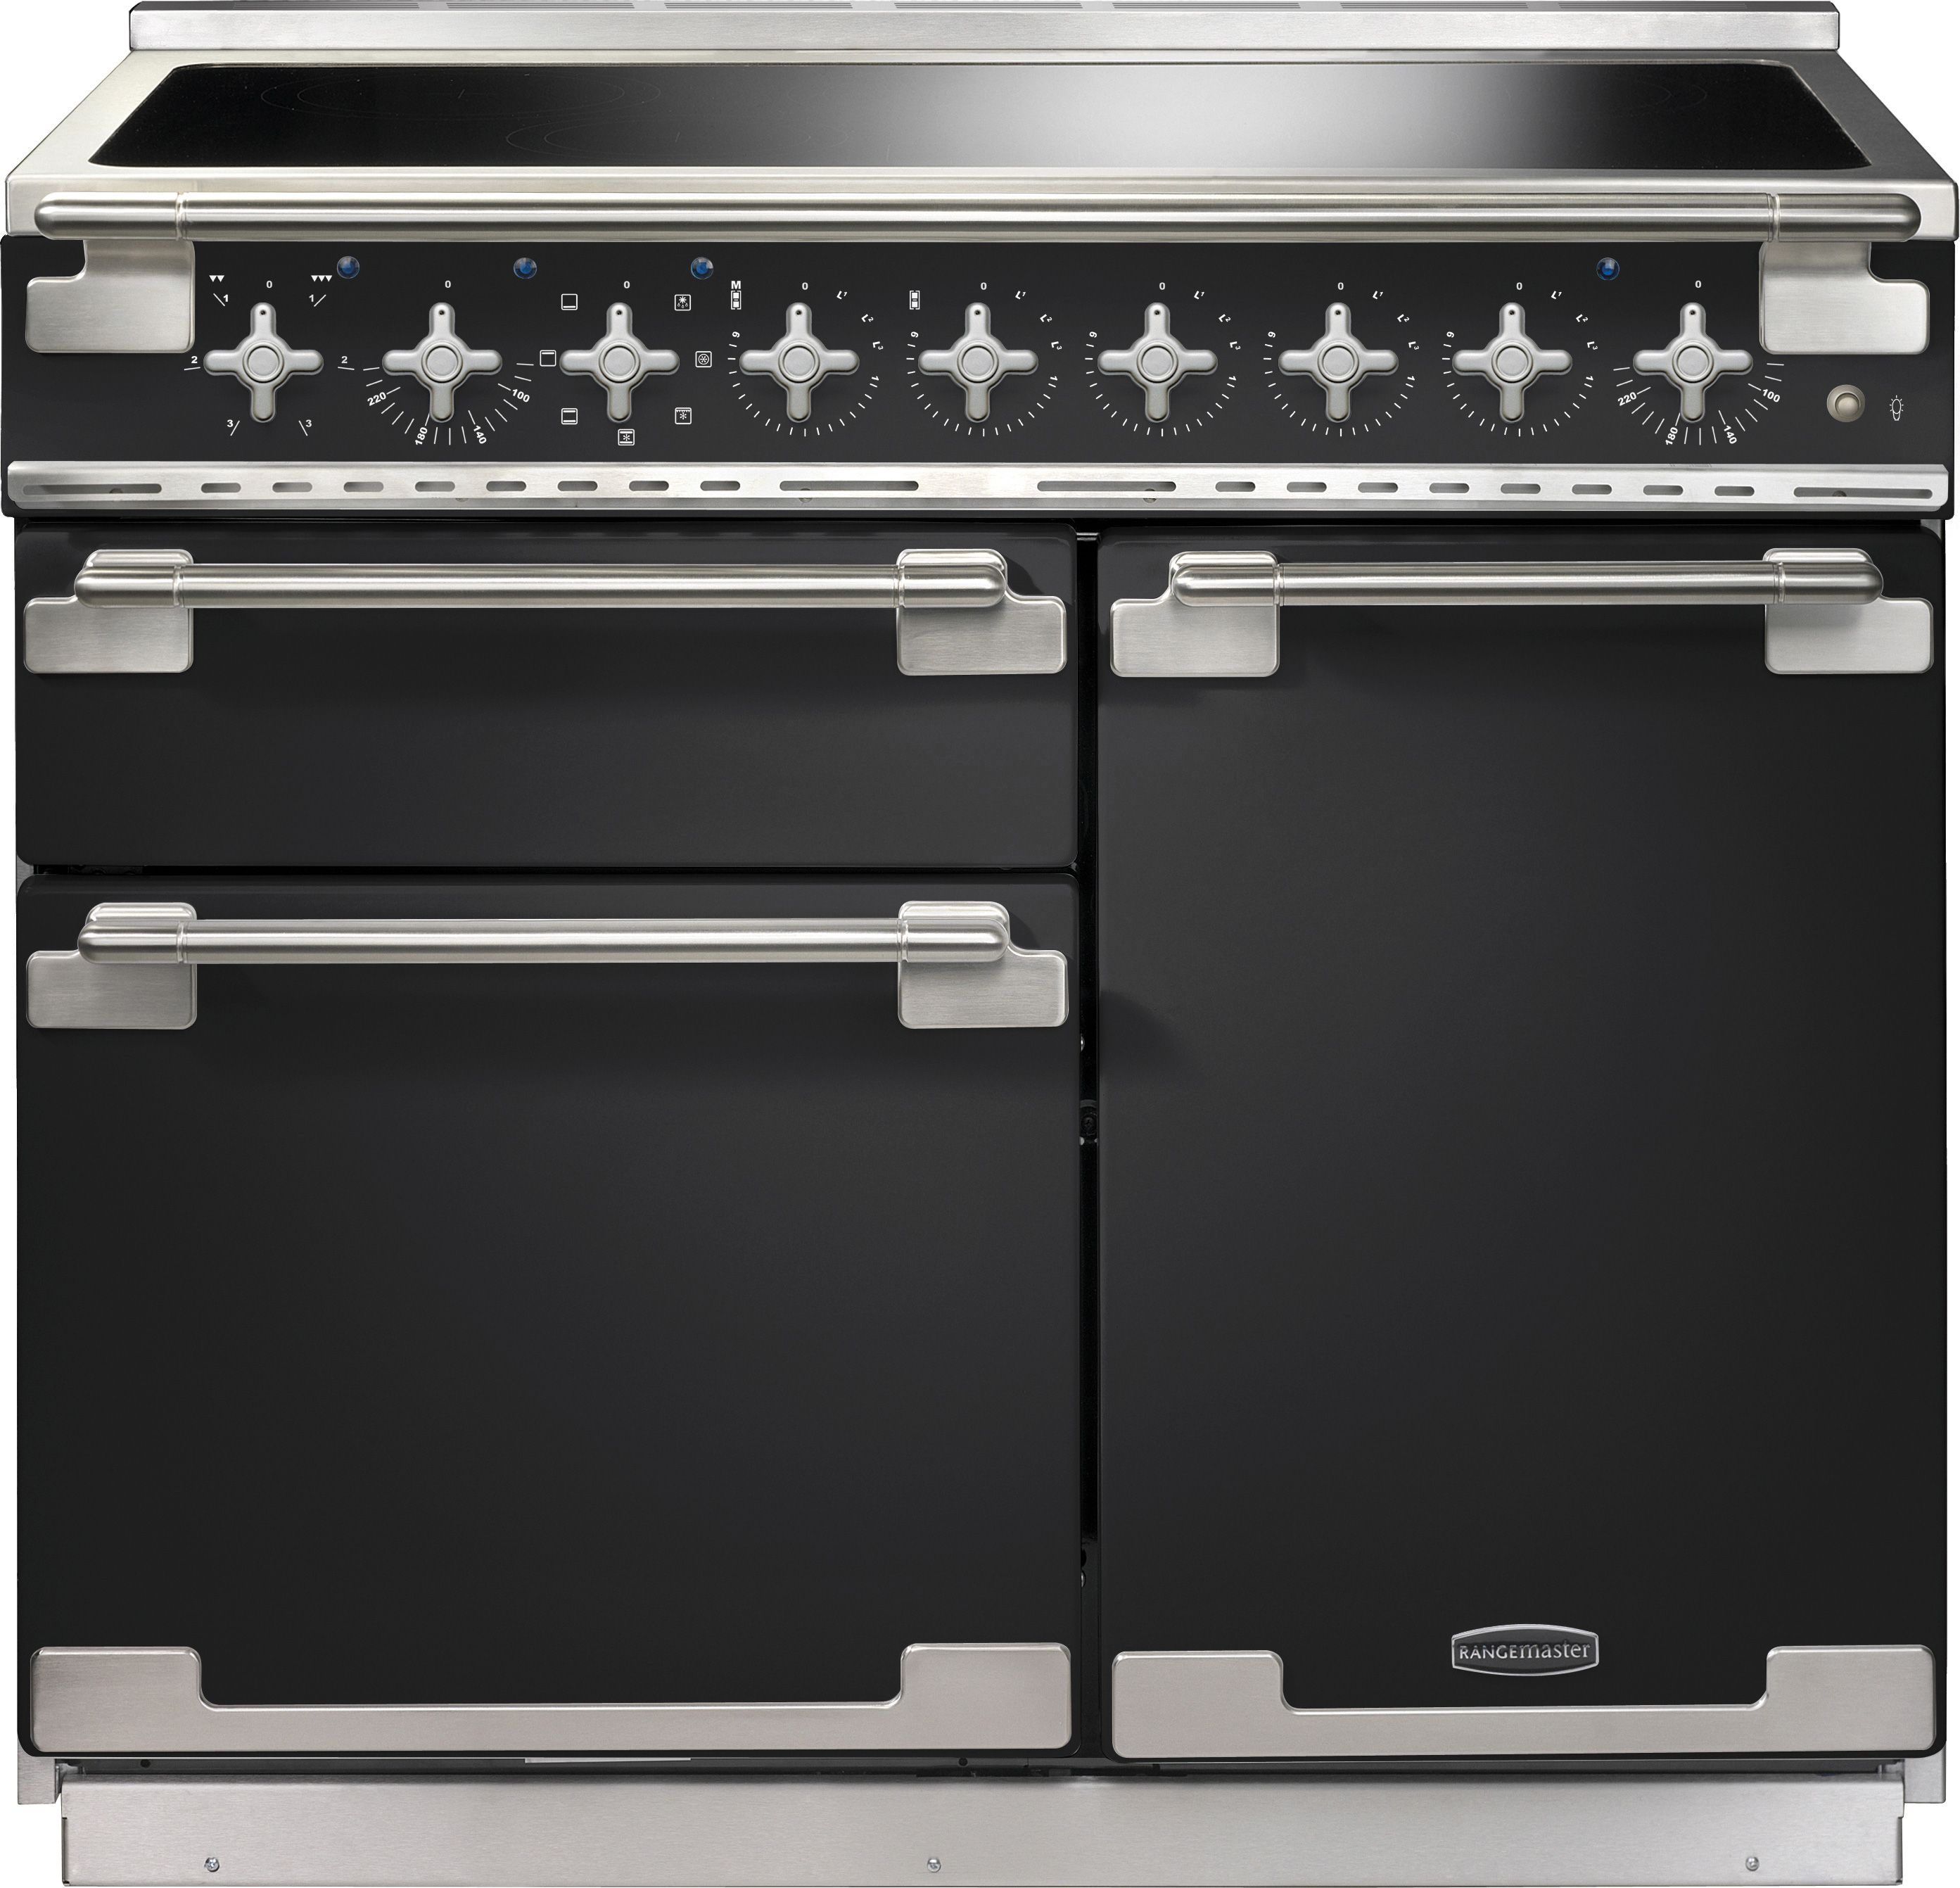 Rangemaster Elise ELS100EICB 100cm Electric Range Cooker with Induction Hob - Charcoal Black - A/A/A Rated, Charcoal Black